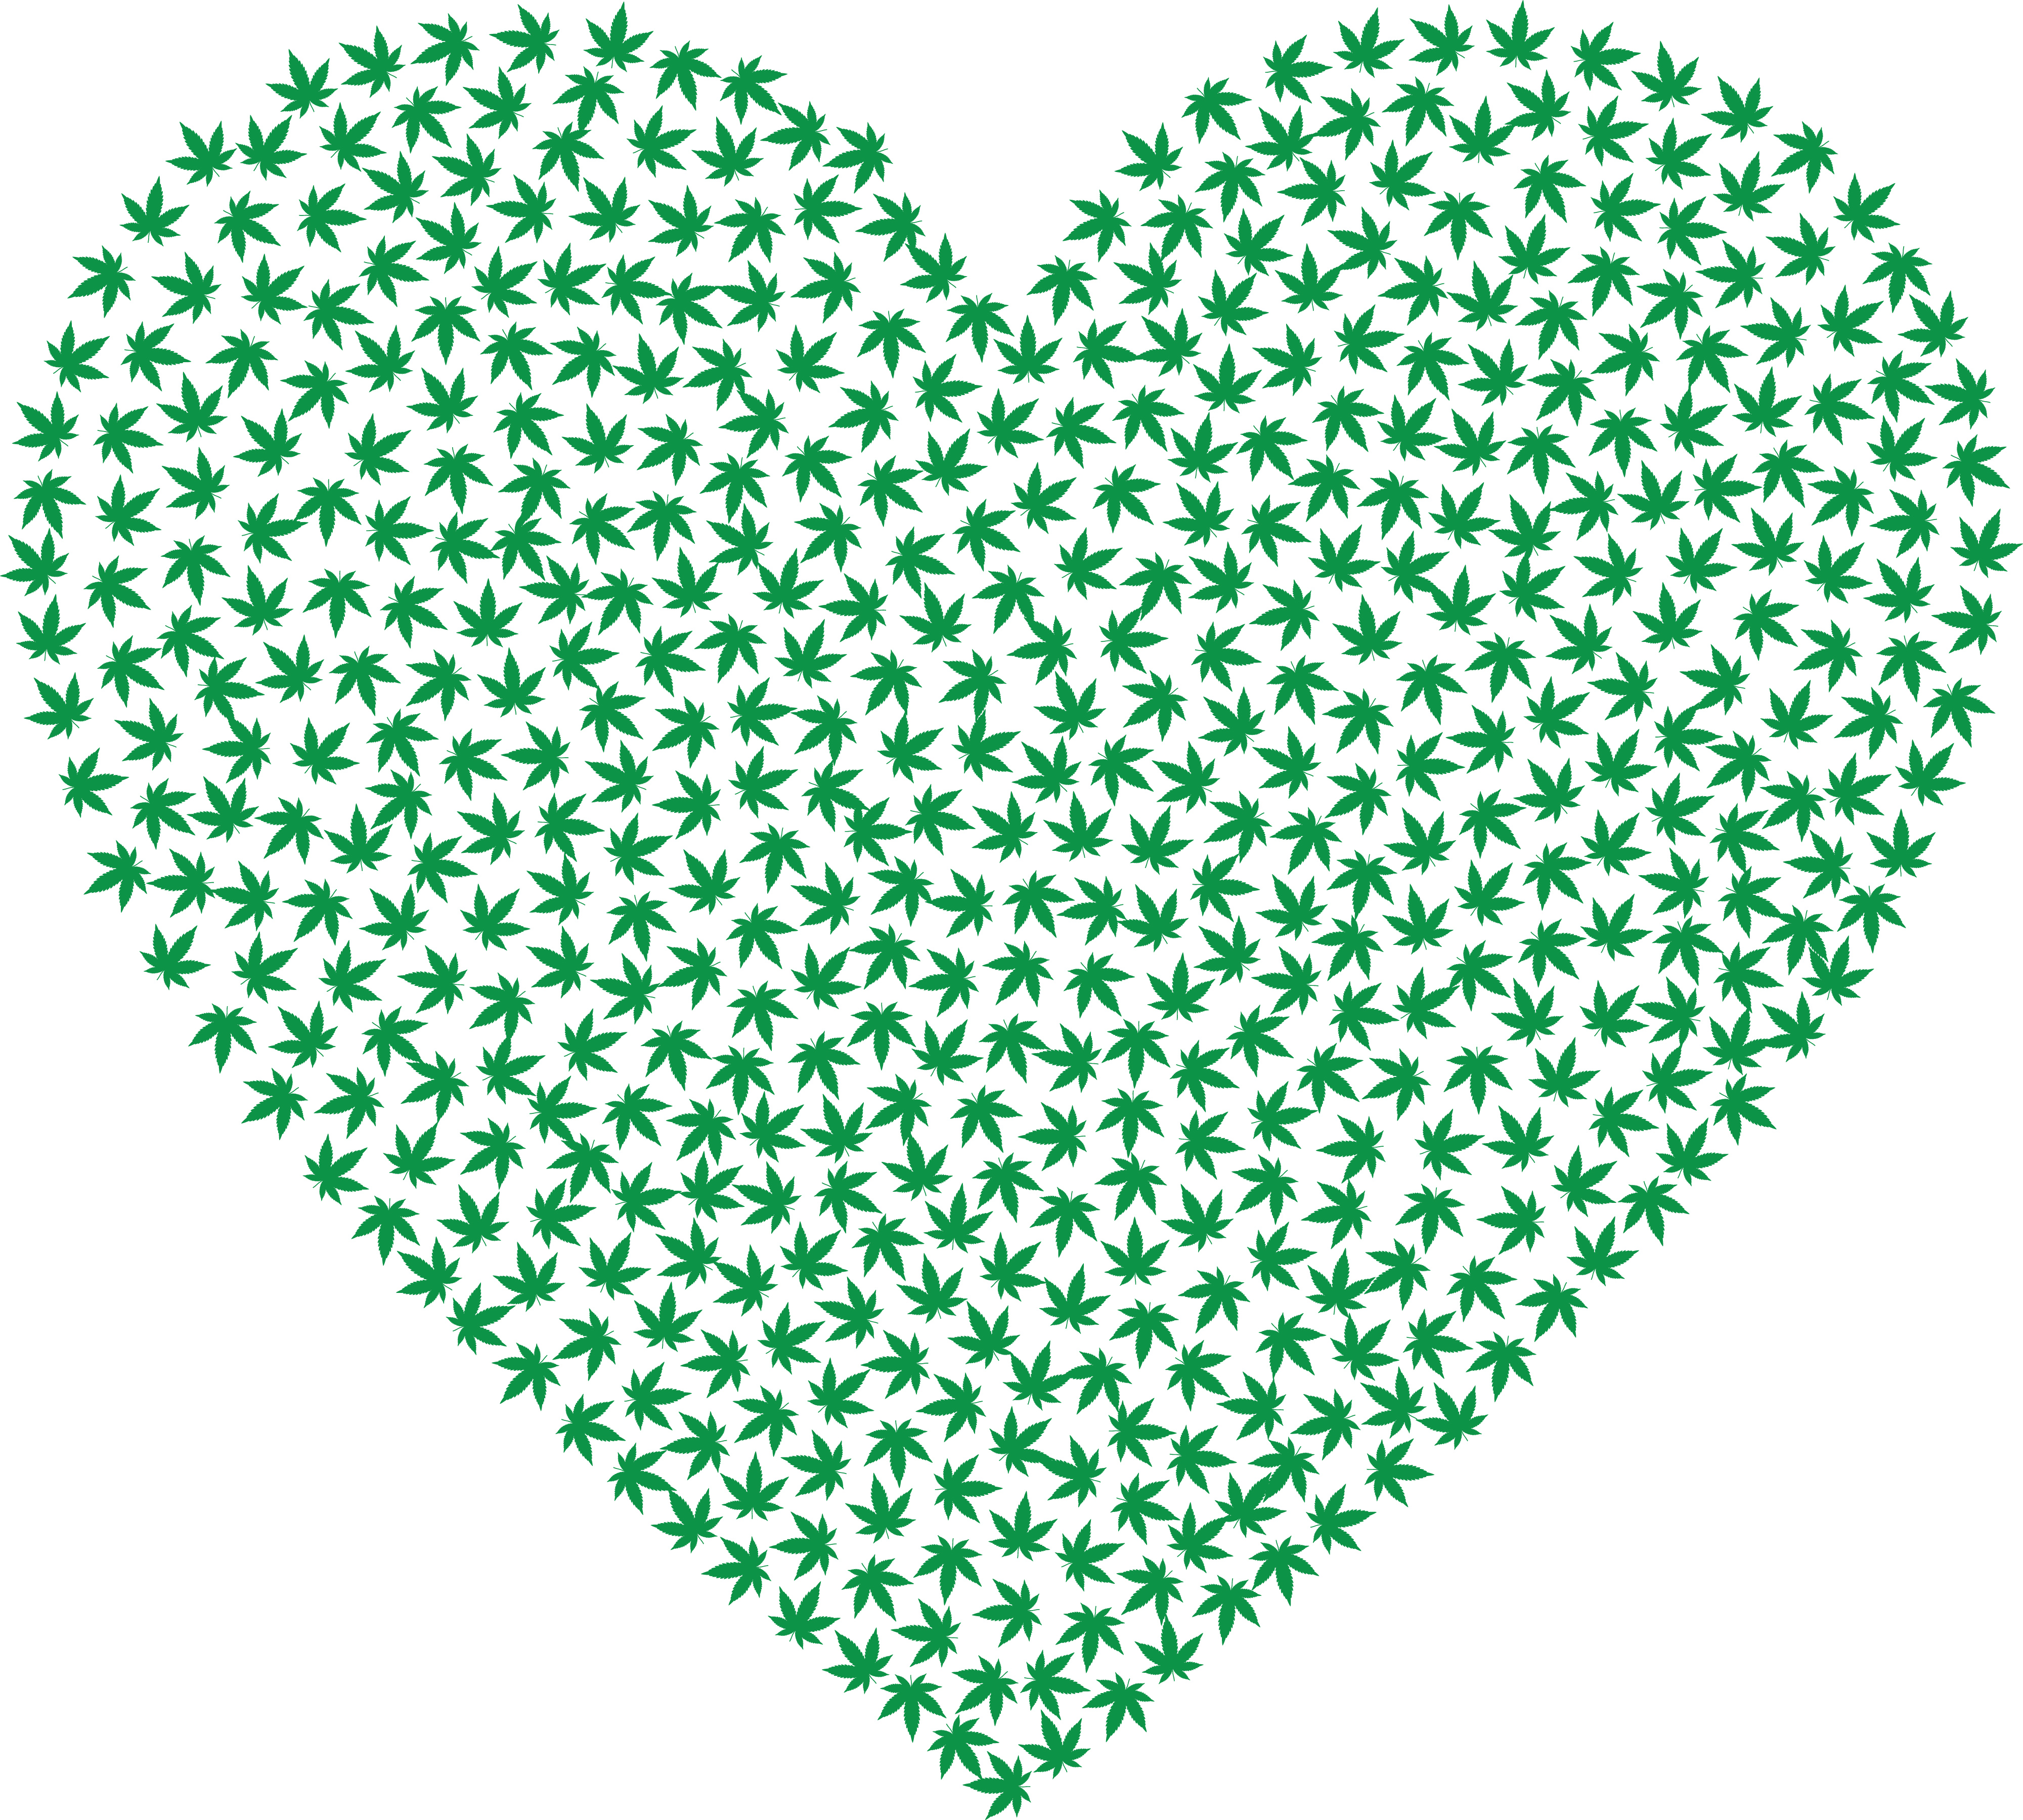 Download Free Clipart Of A love heart made of marijuana leaves